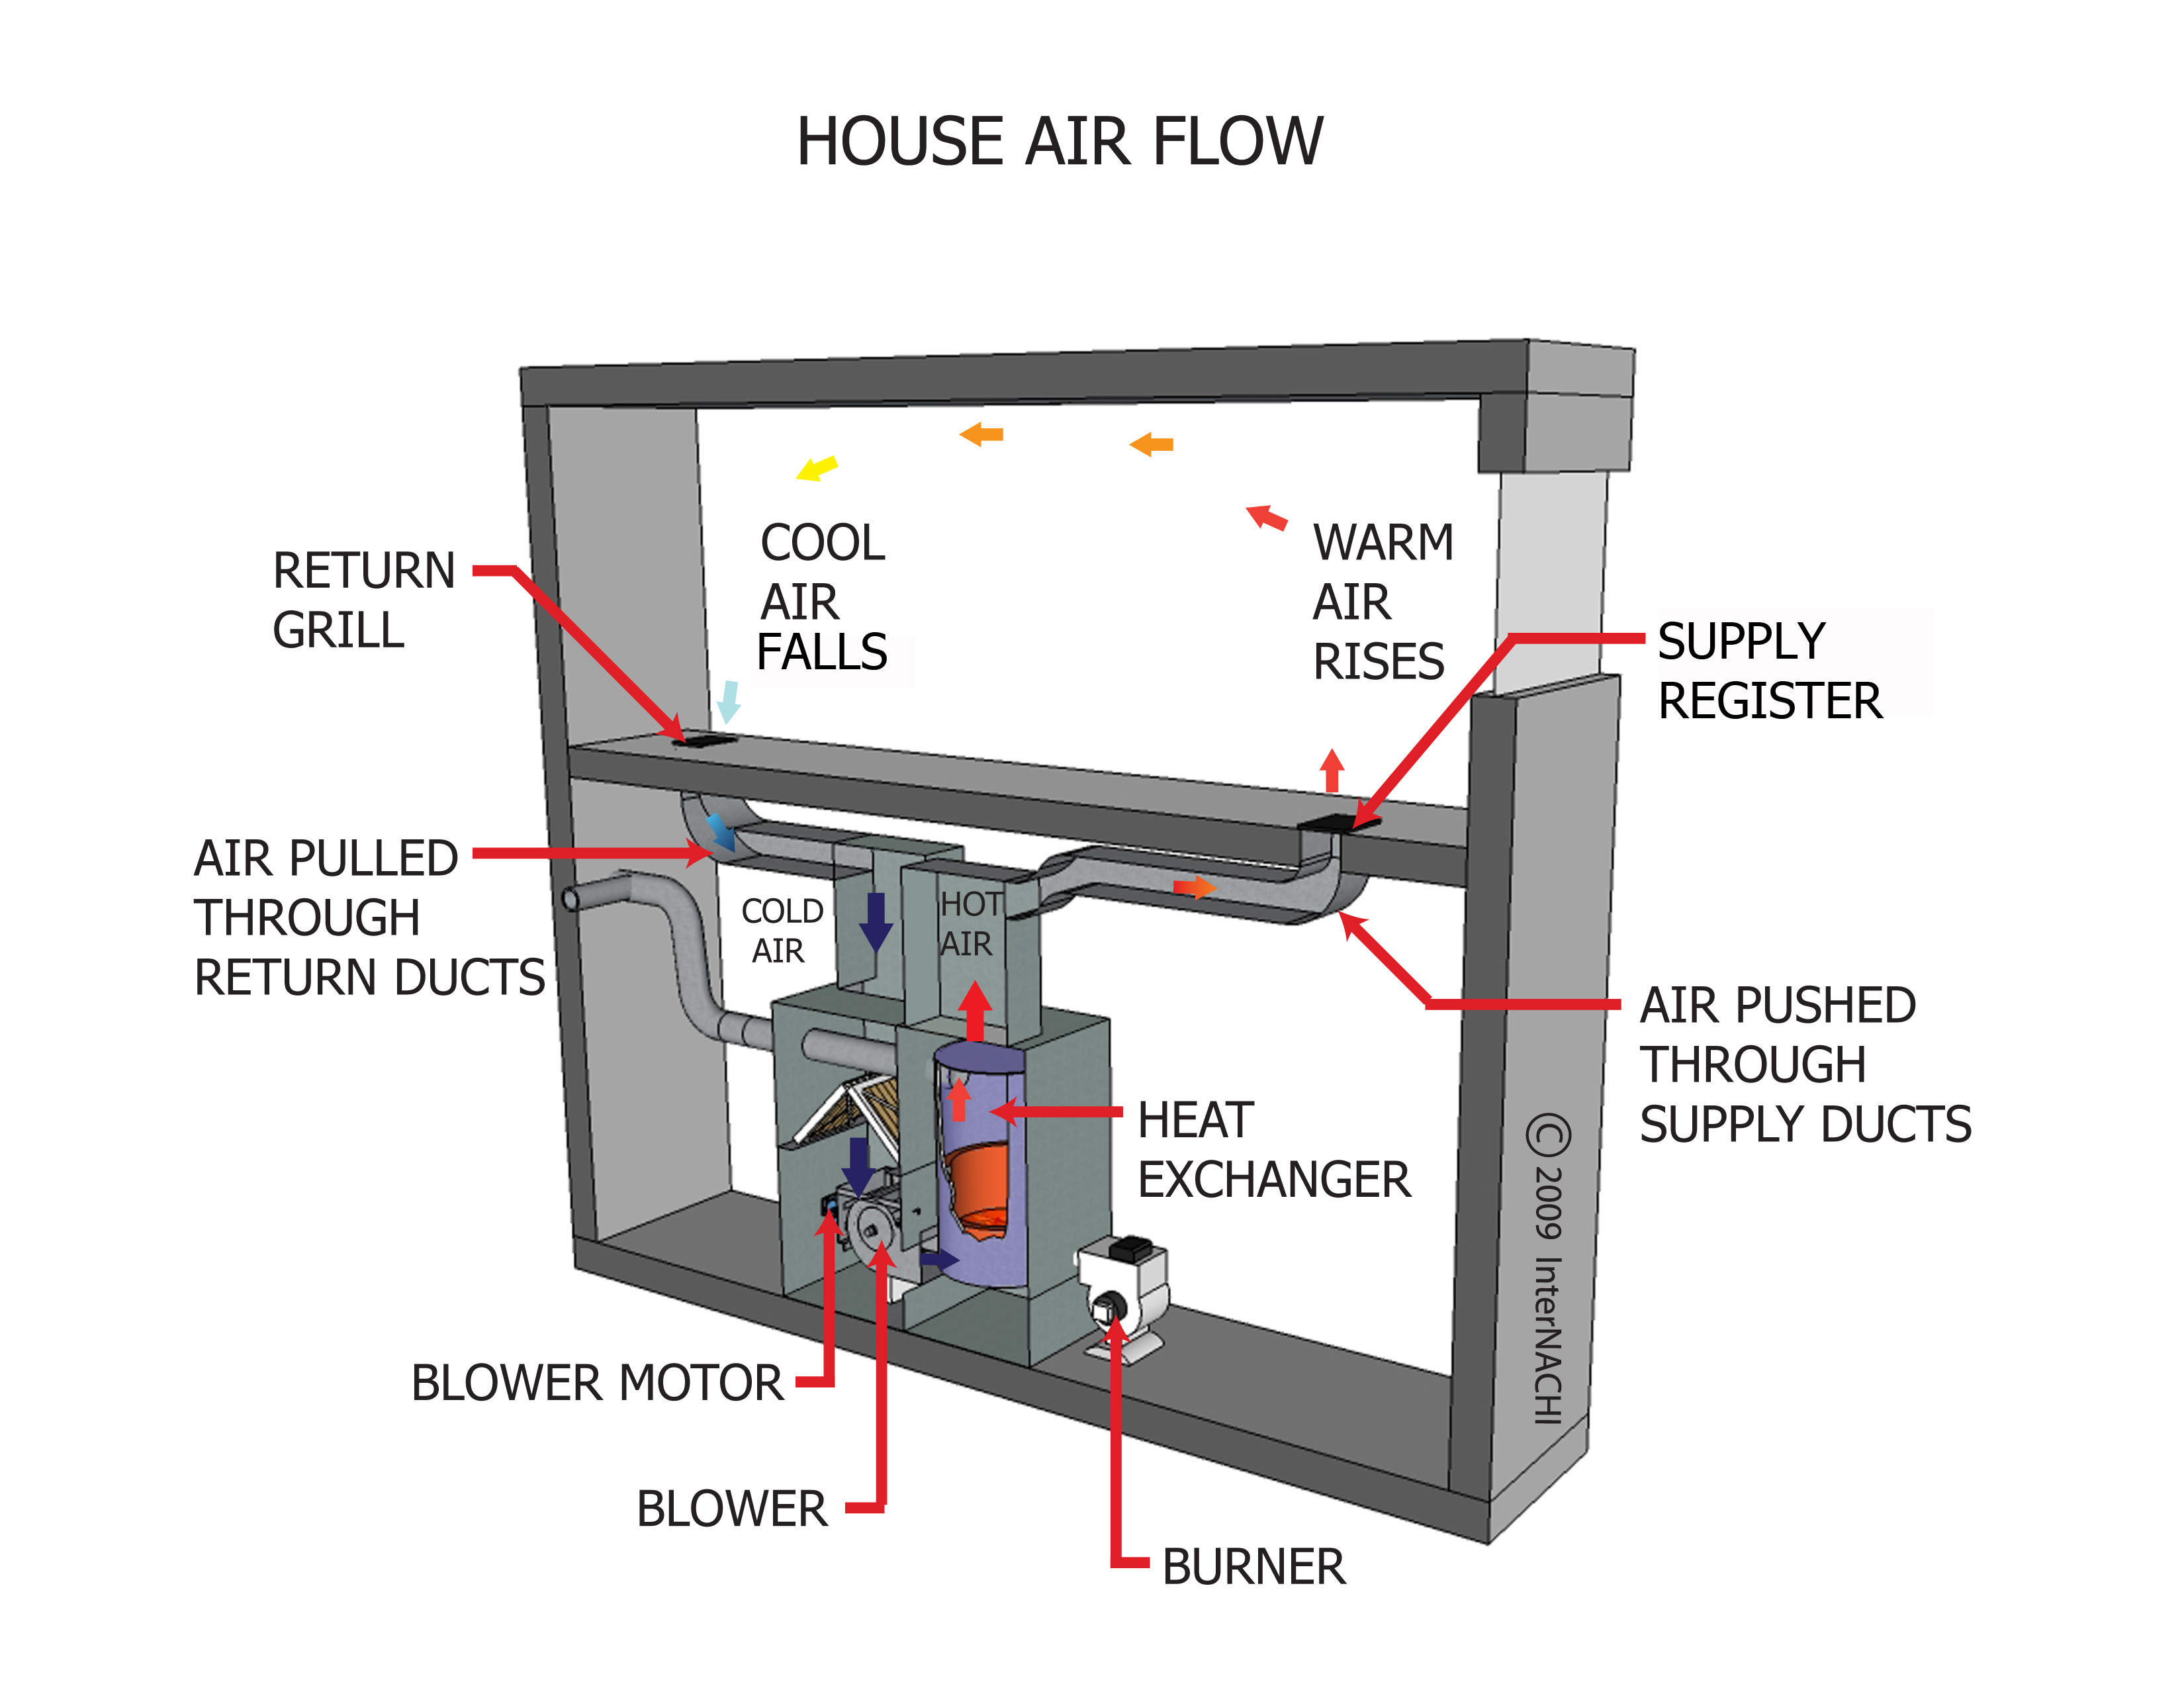 House duct air flow.